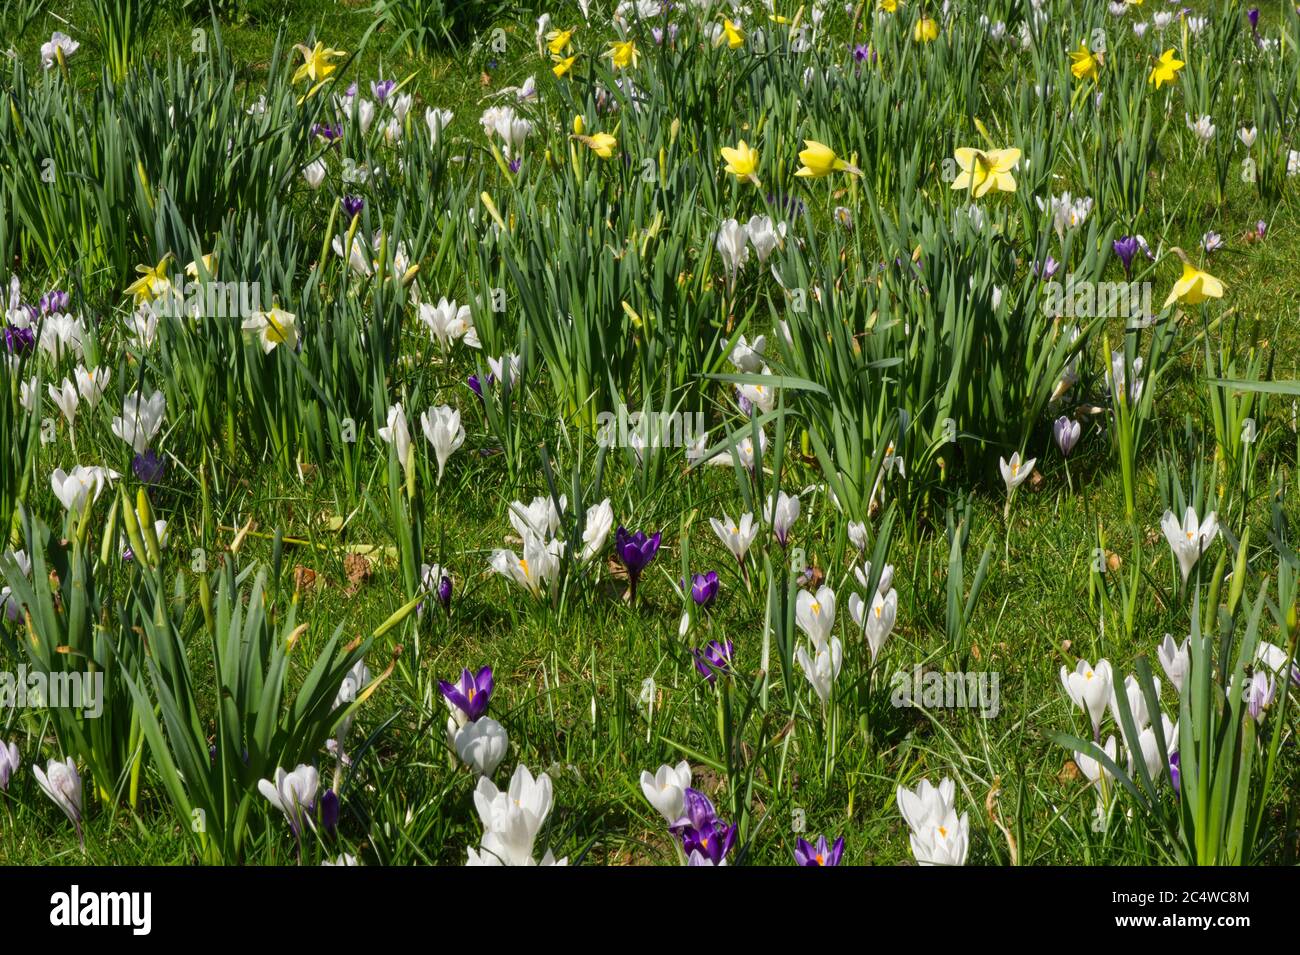 Crocus biflorus white flowers and daffodils in grass, West Sussex, England Stock Photo